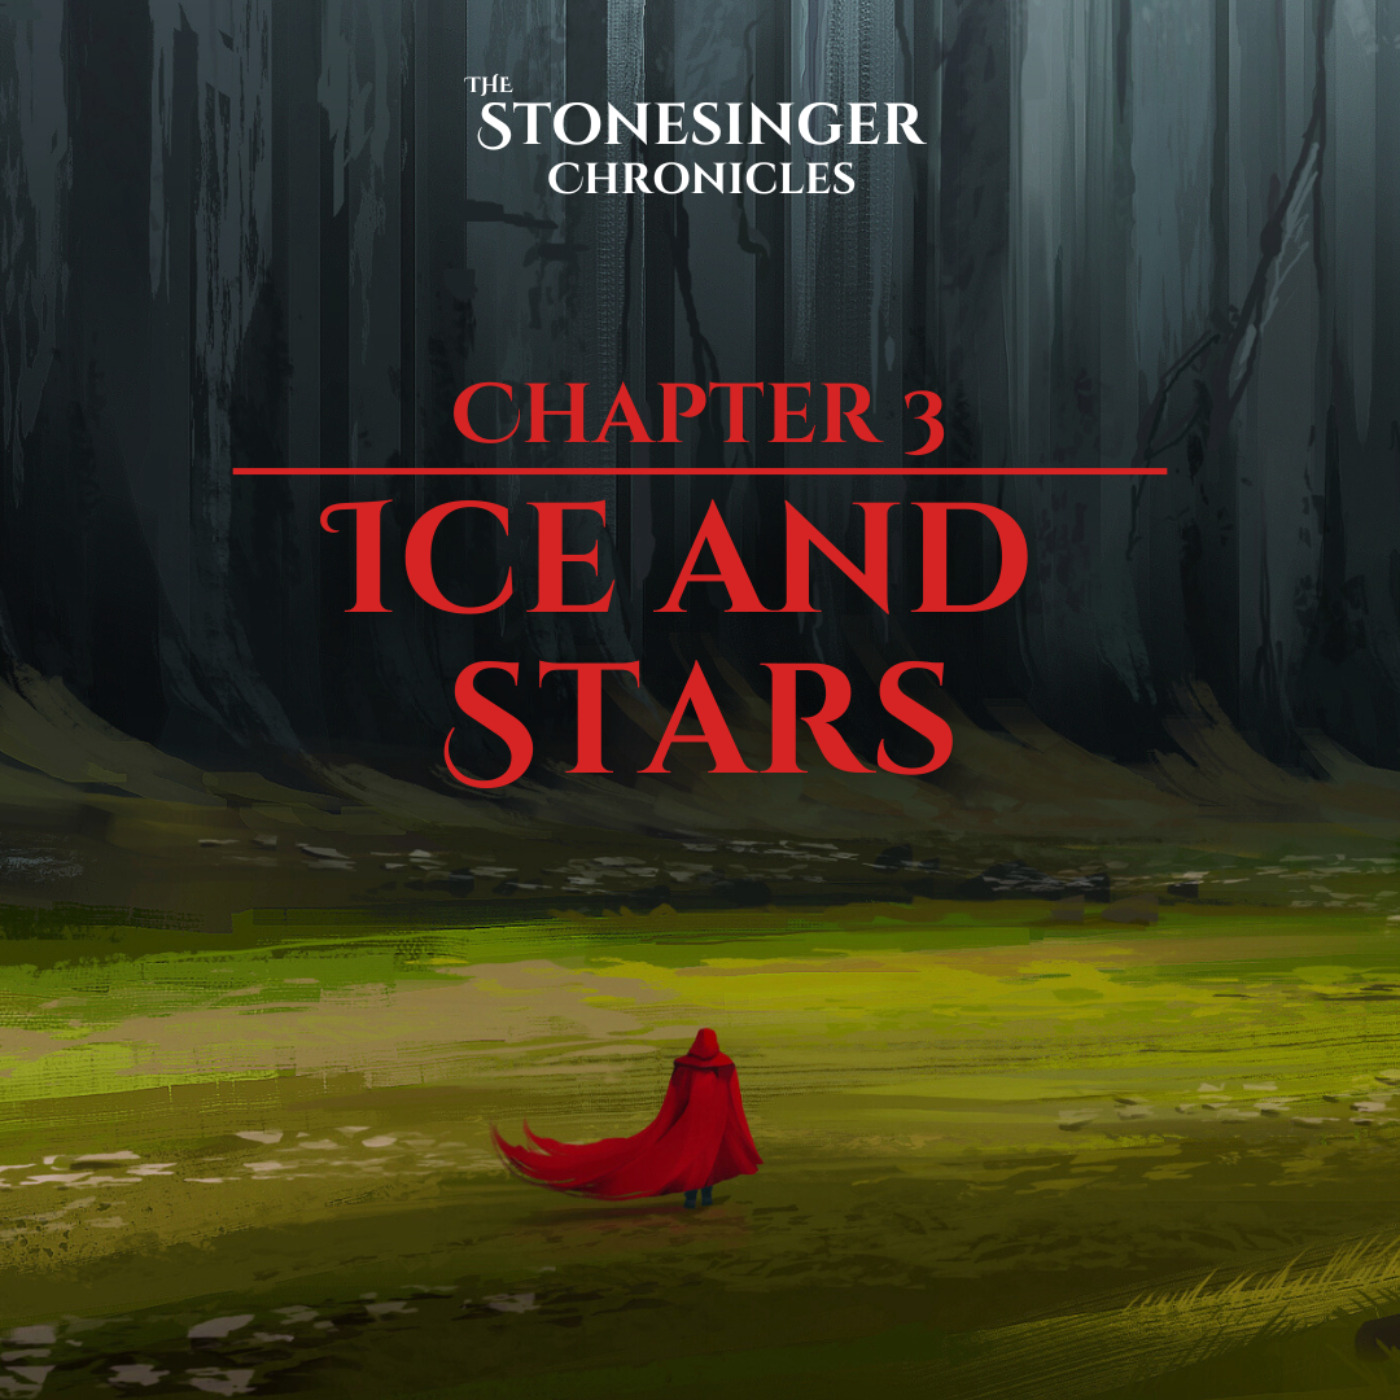 Book 1 | Chapter 3 | Ice and Stars